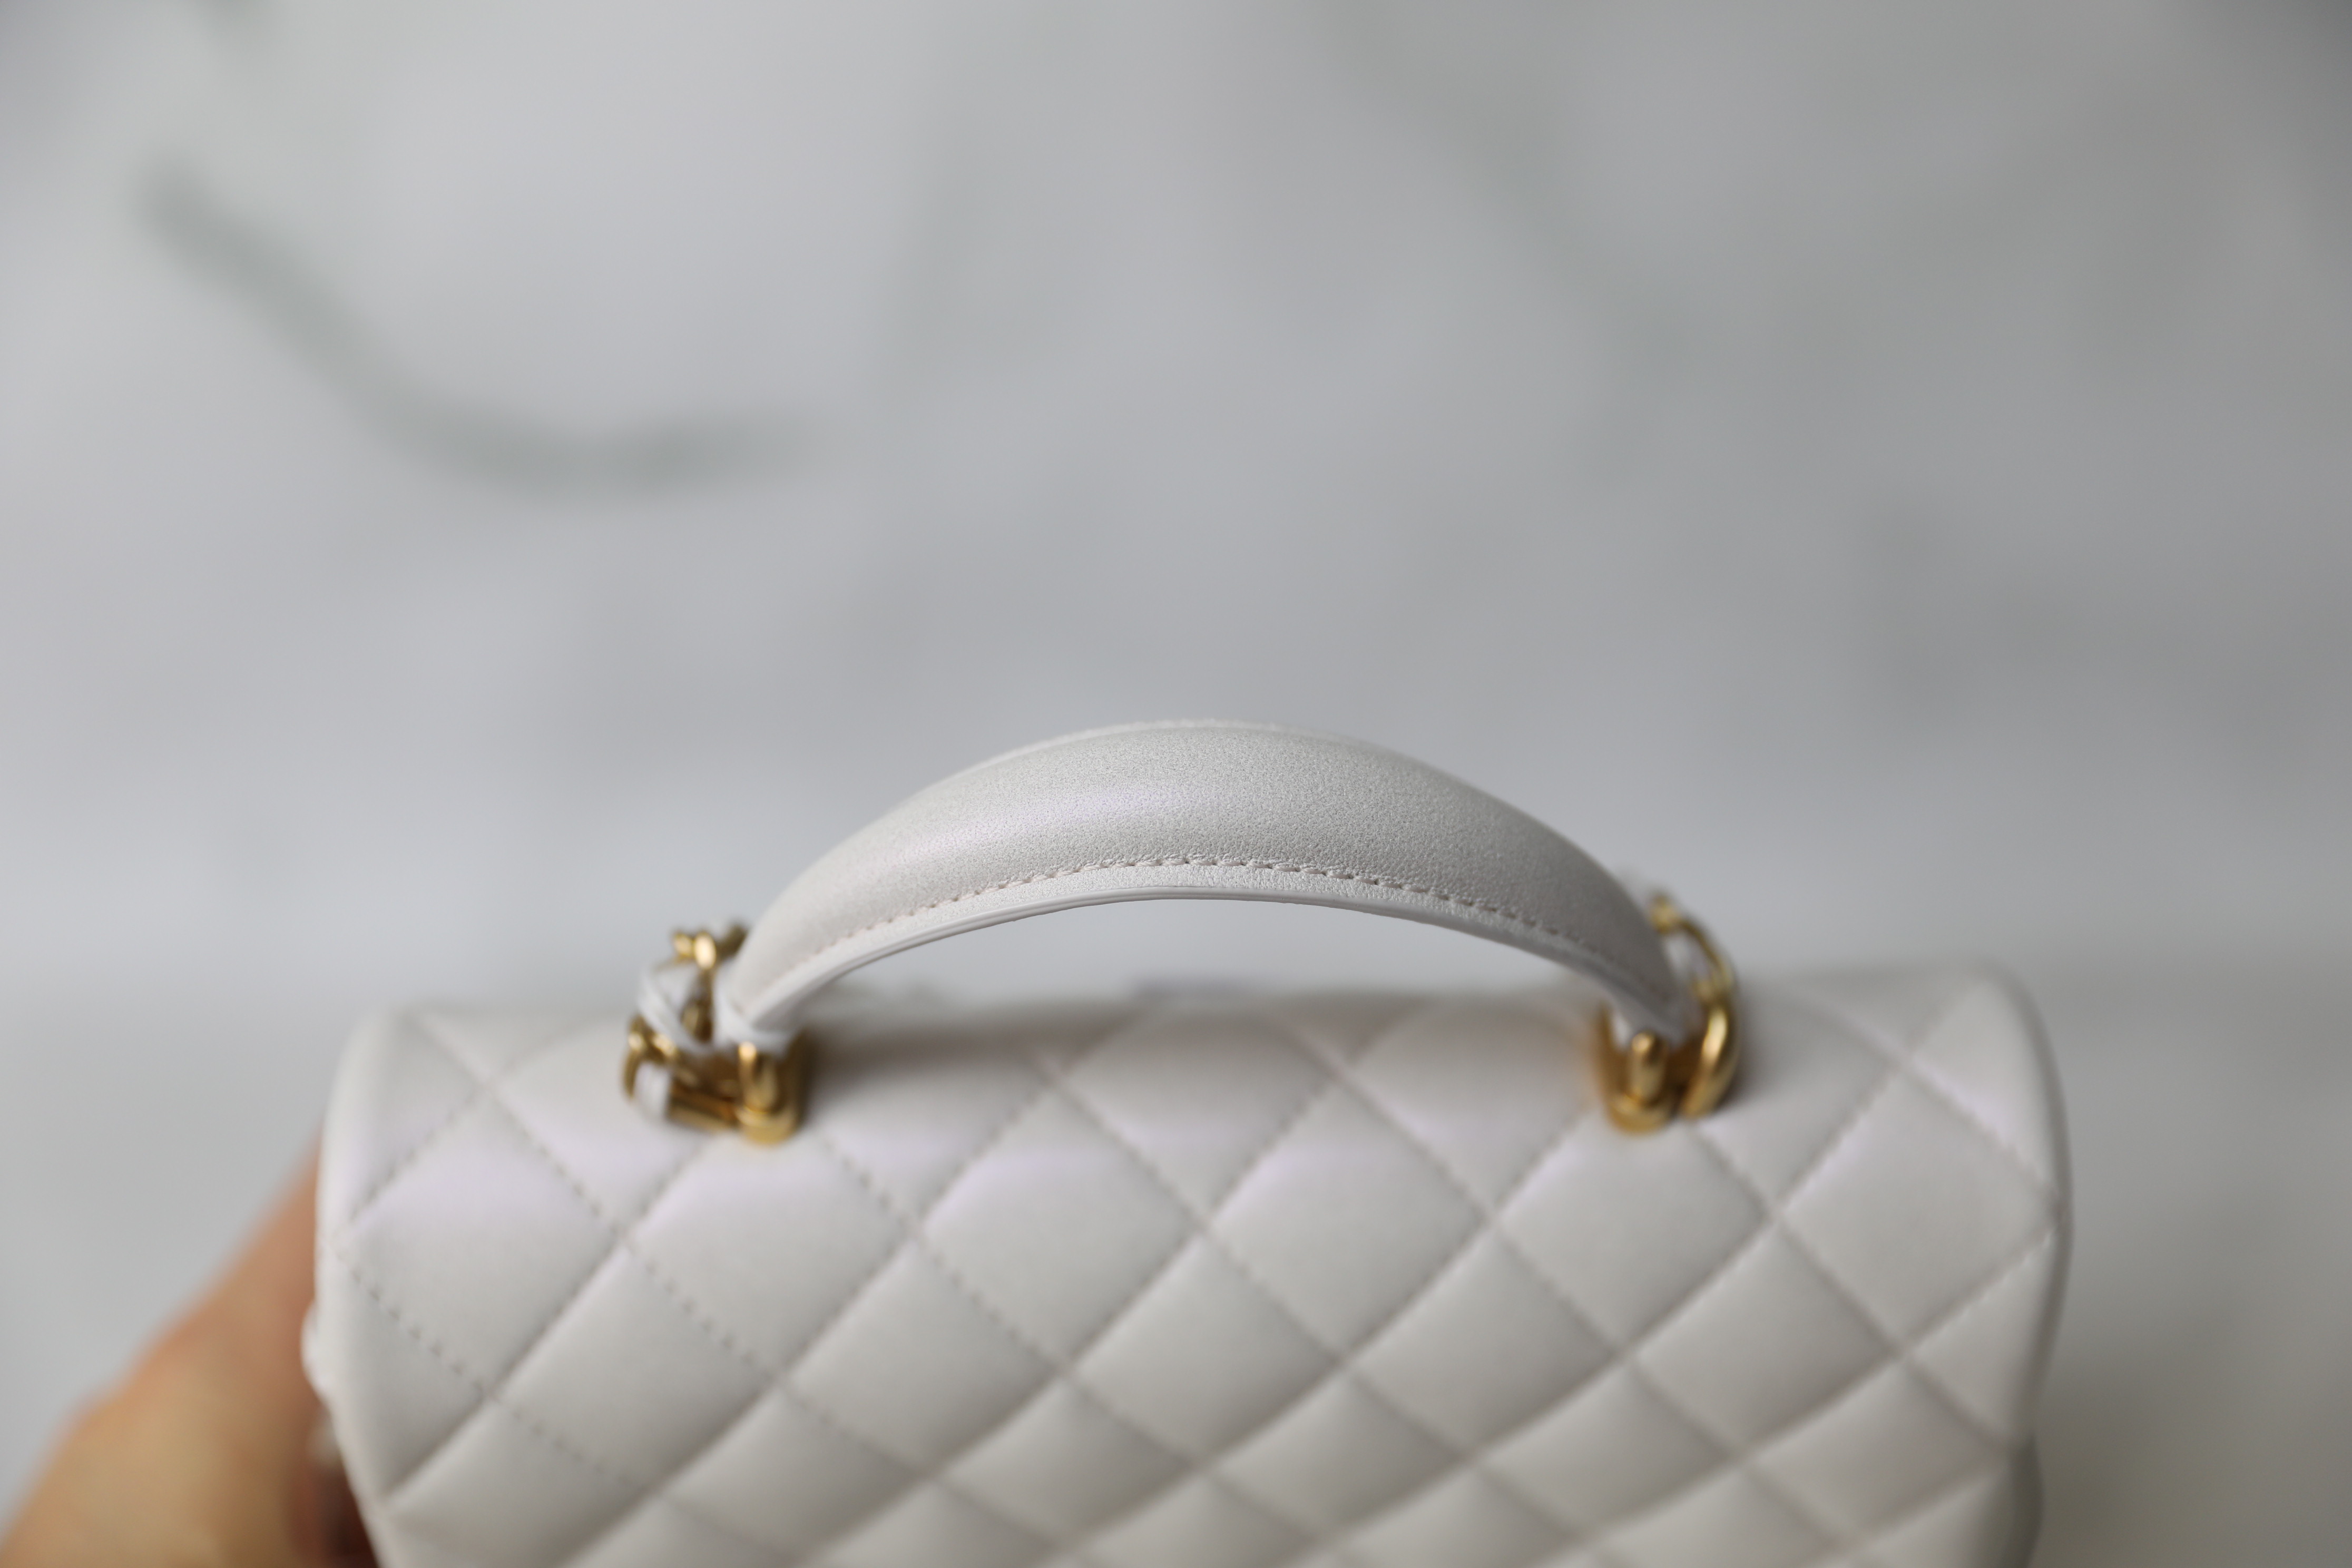 Chanel Mini with Top Handle, White Iridescent Lambskin with Gold